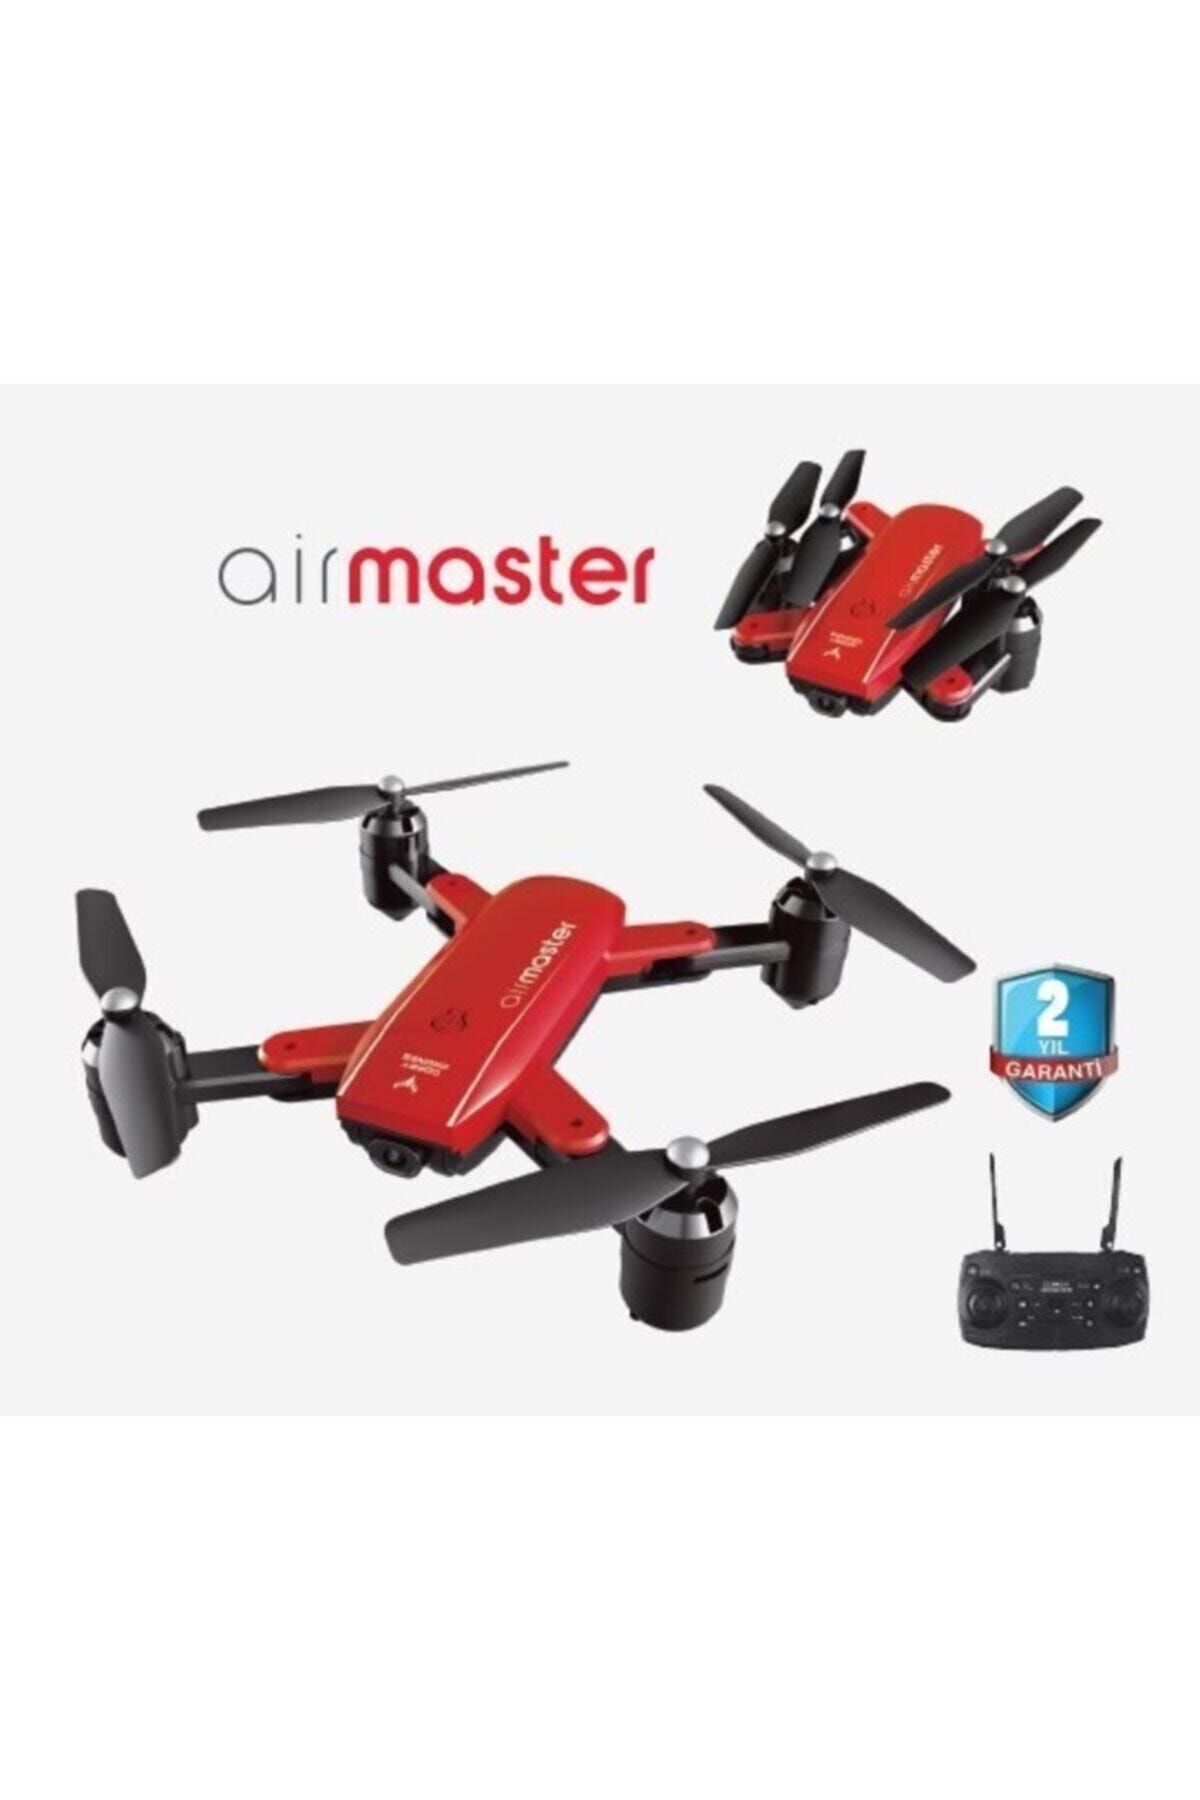 Corby Sd01 Air Master Drone